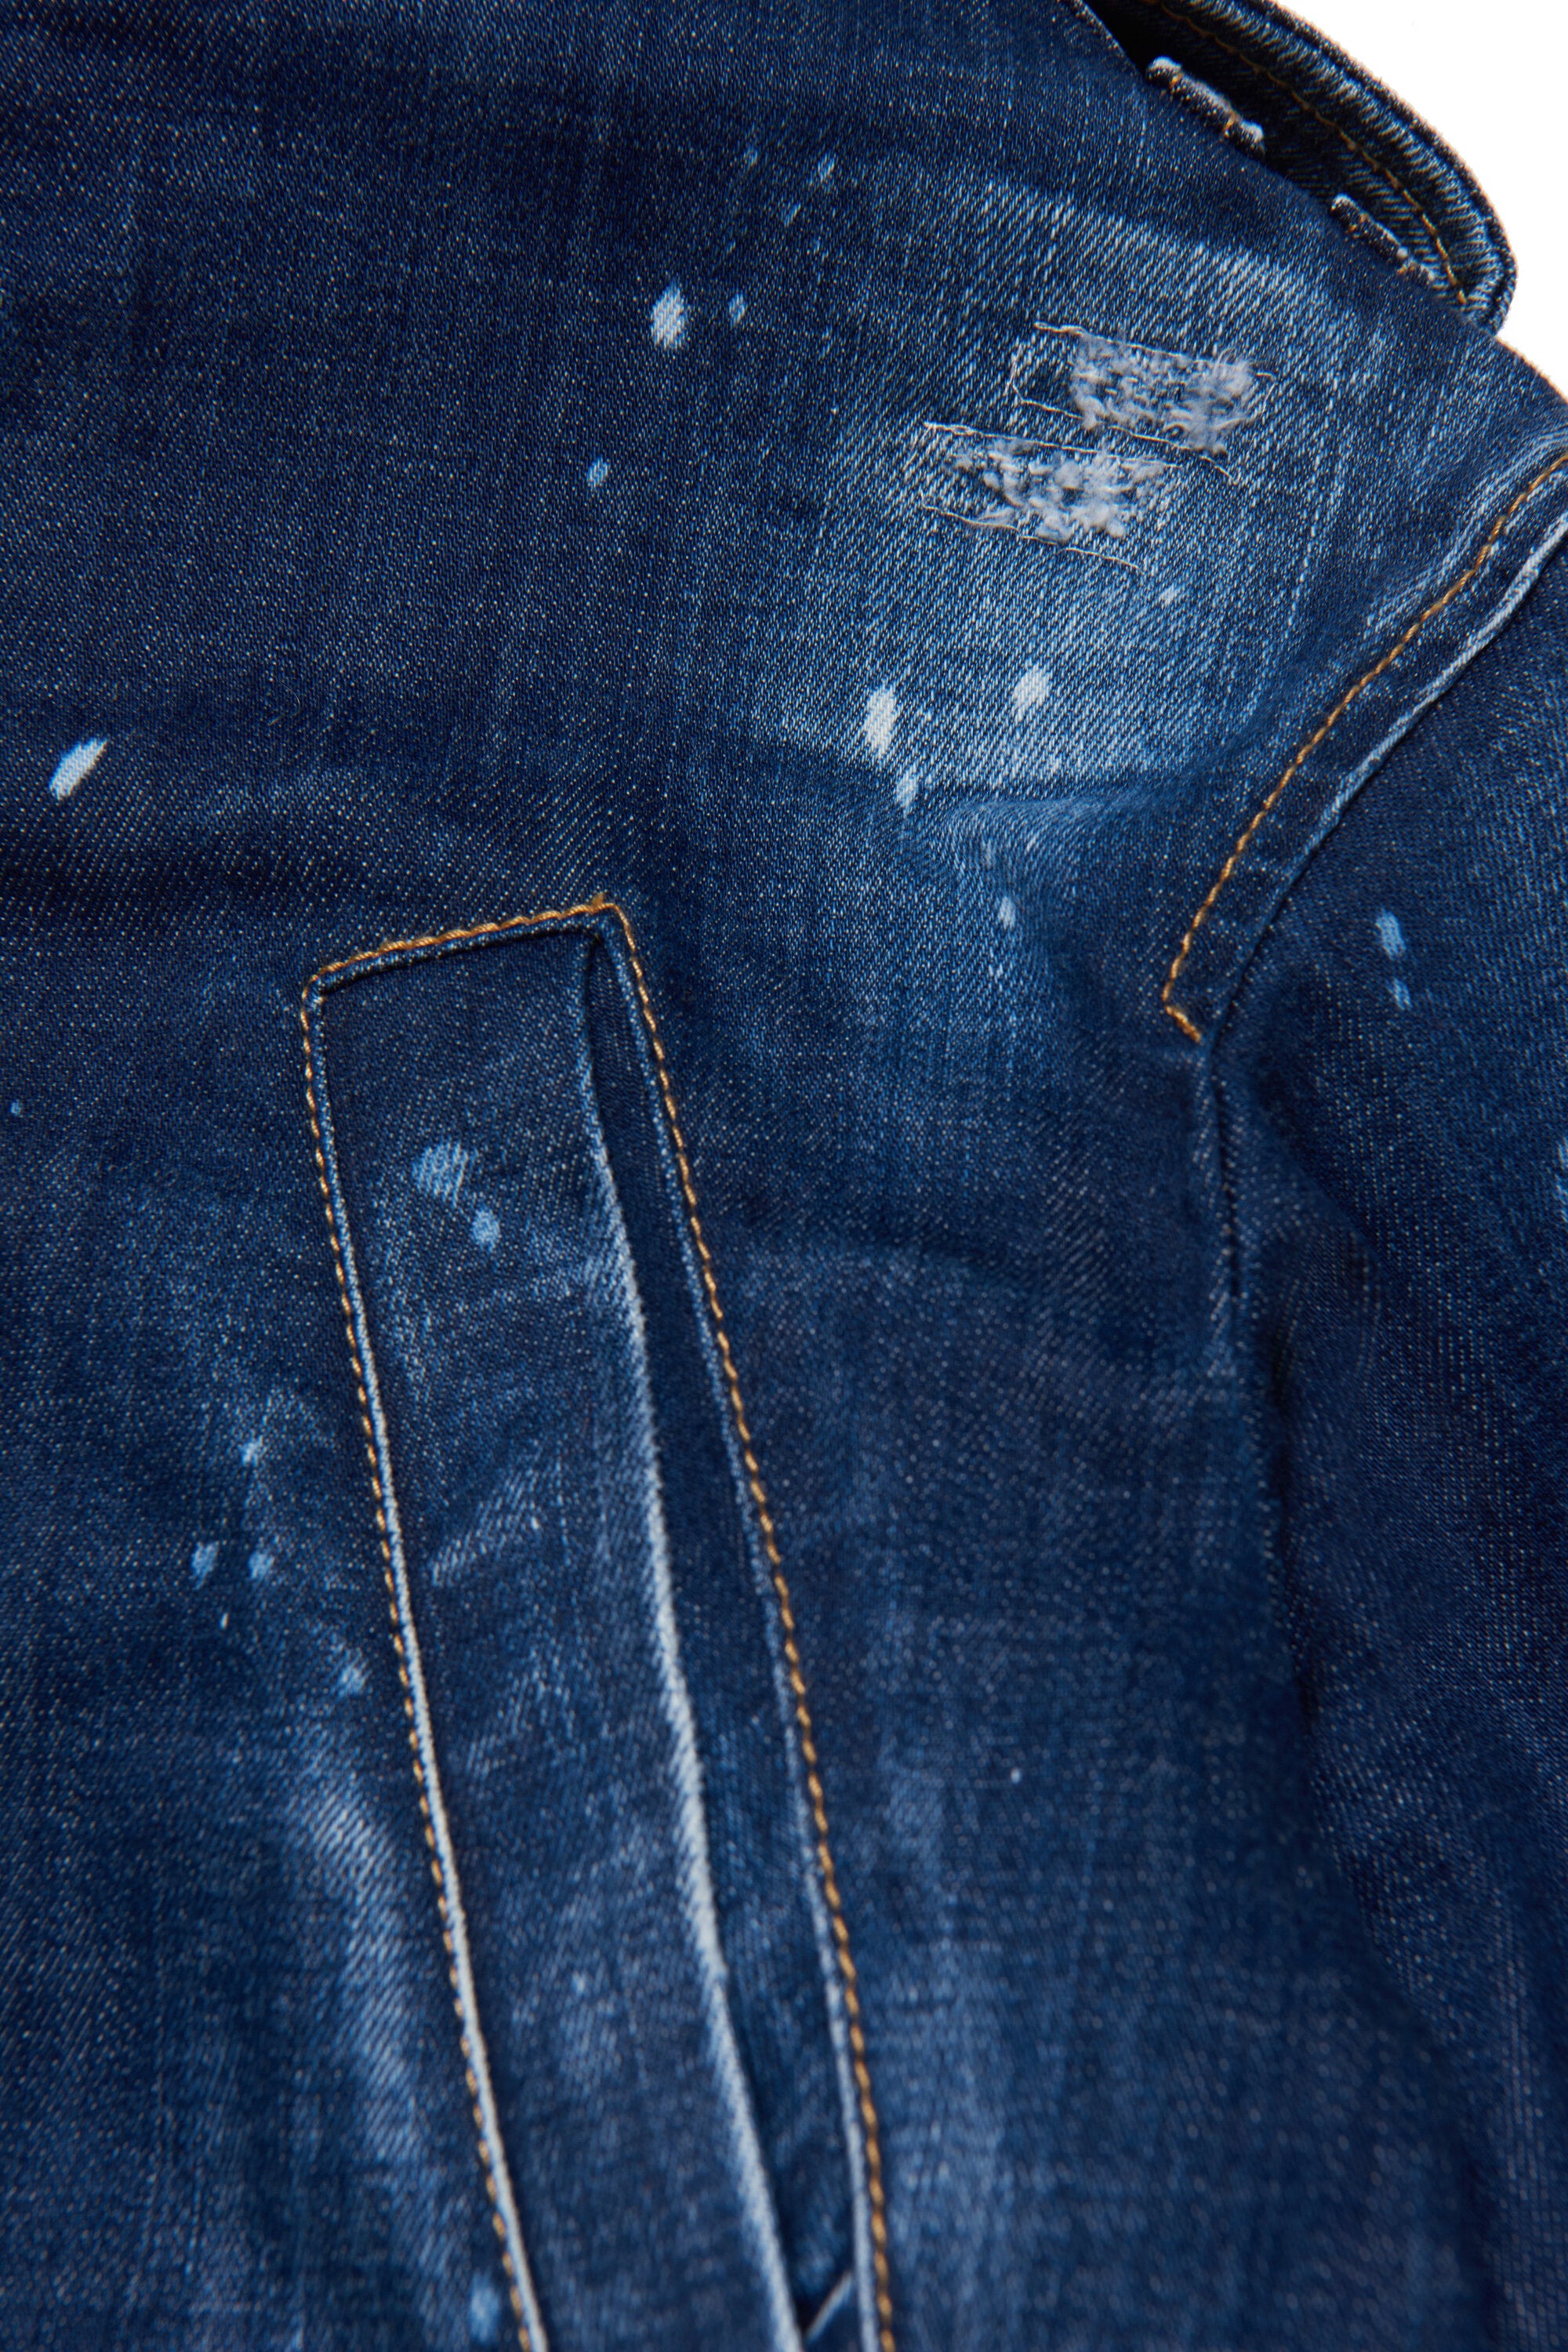 Shaded blue denim parka jacket with abrasions and stains